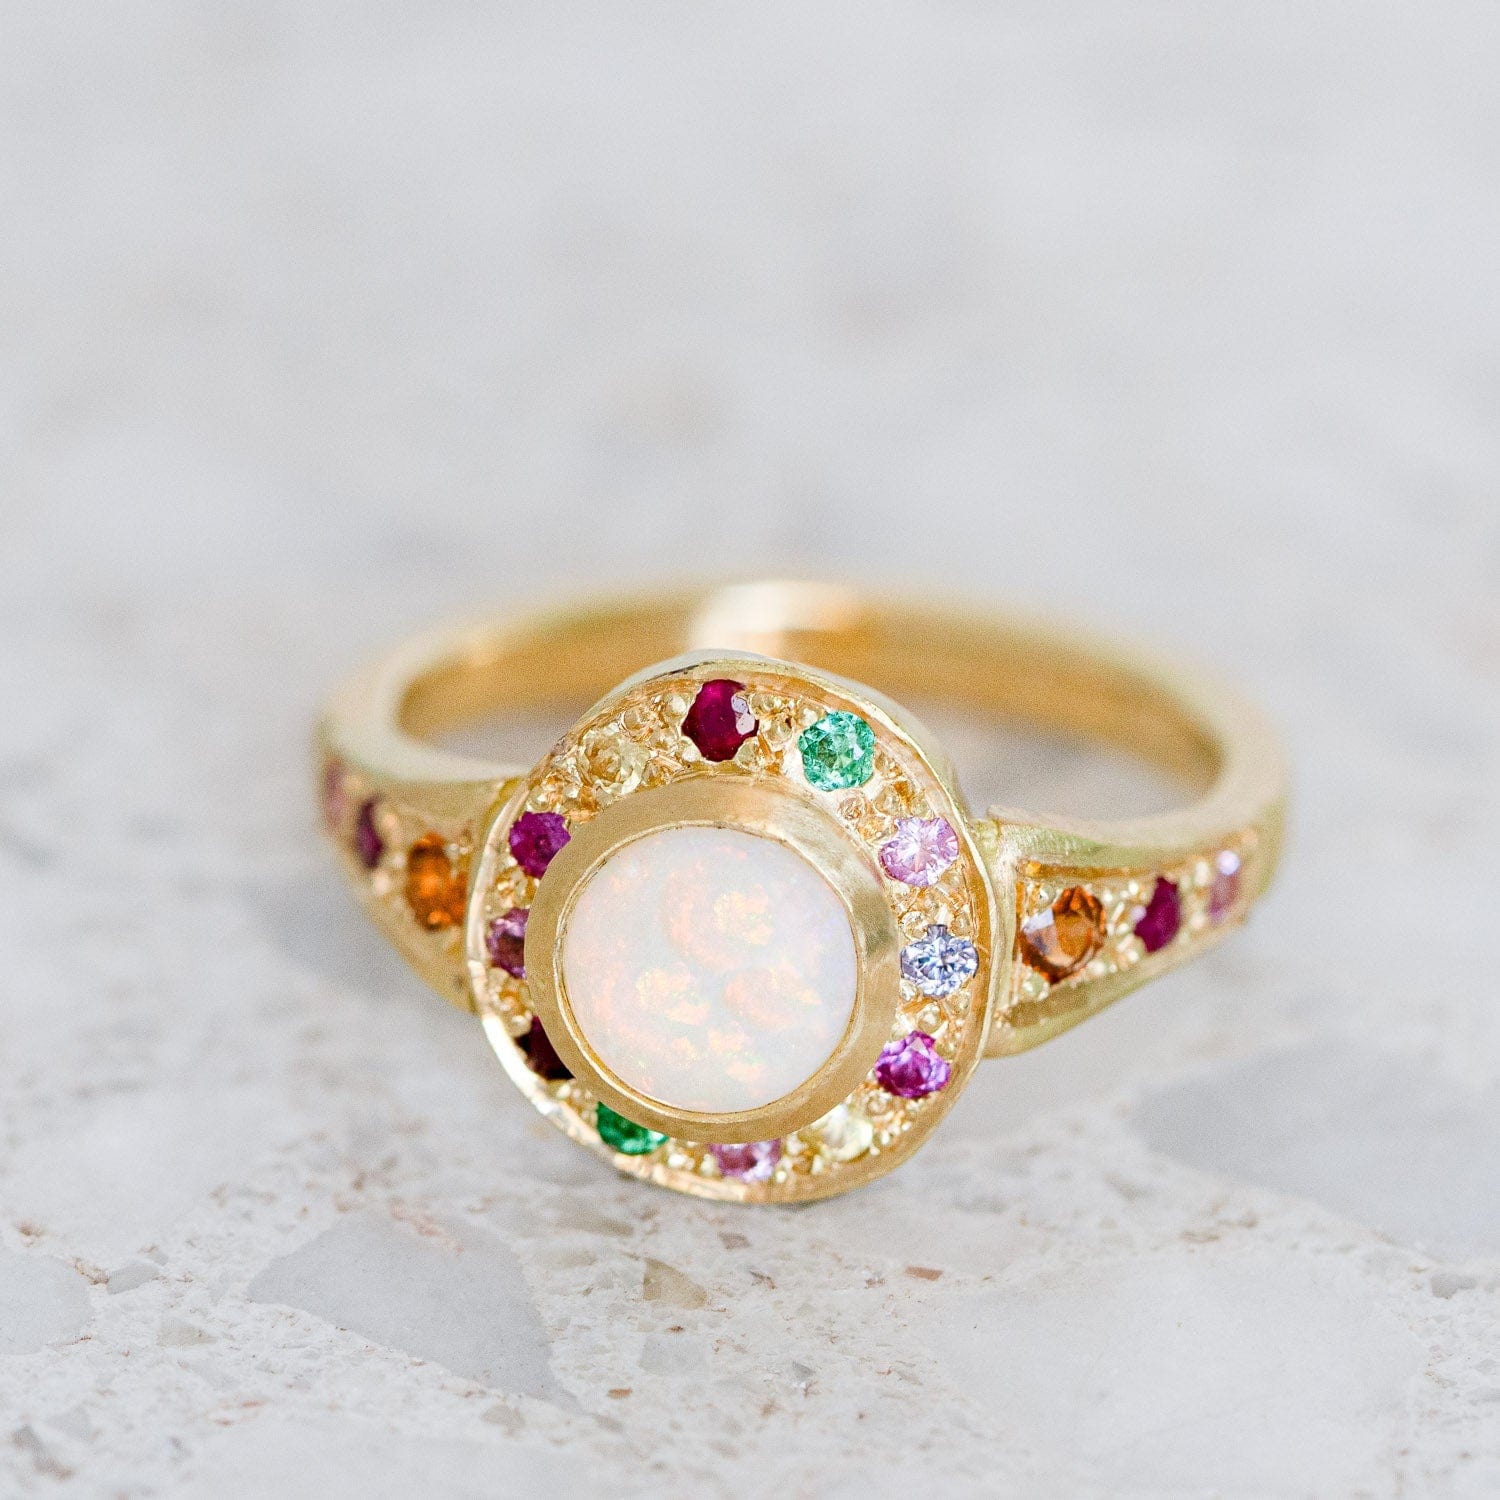 Luxury Promise Magical Crystal Opal surrounded by multi coloured sapphires, rubies & emeralds set in 18K Yellow Gold